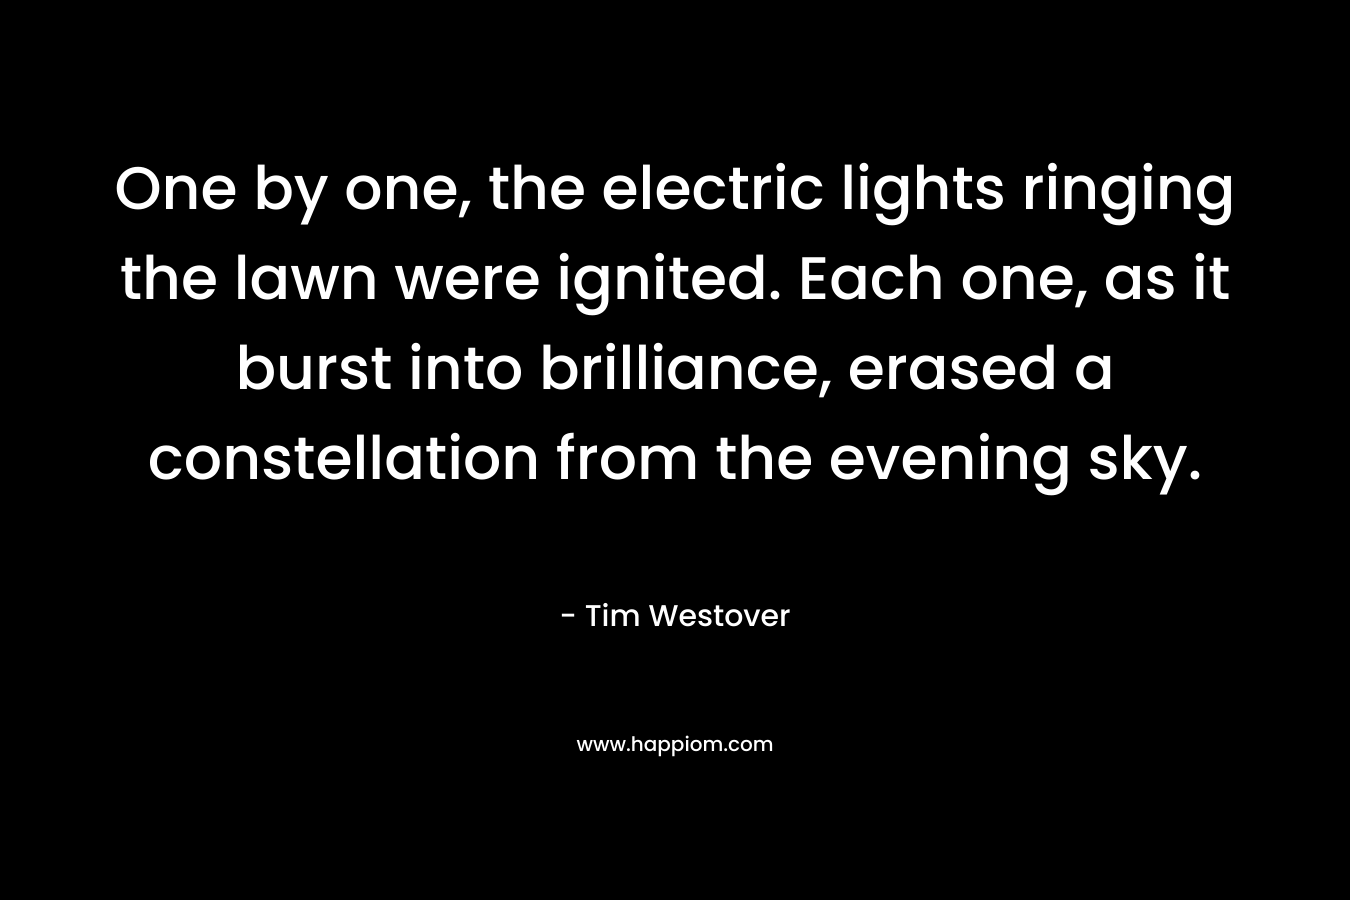 One by one, the electric lights ringing the lawn were ignited. Each one, as it burst into brilliance, erased a constellation from the evening sky.